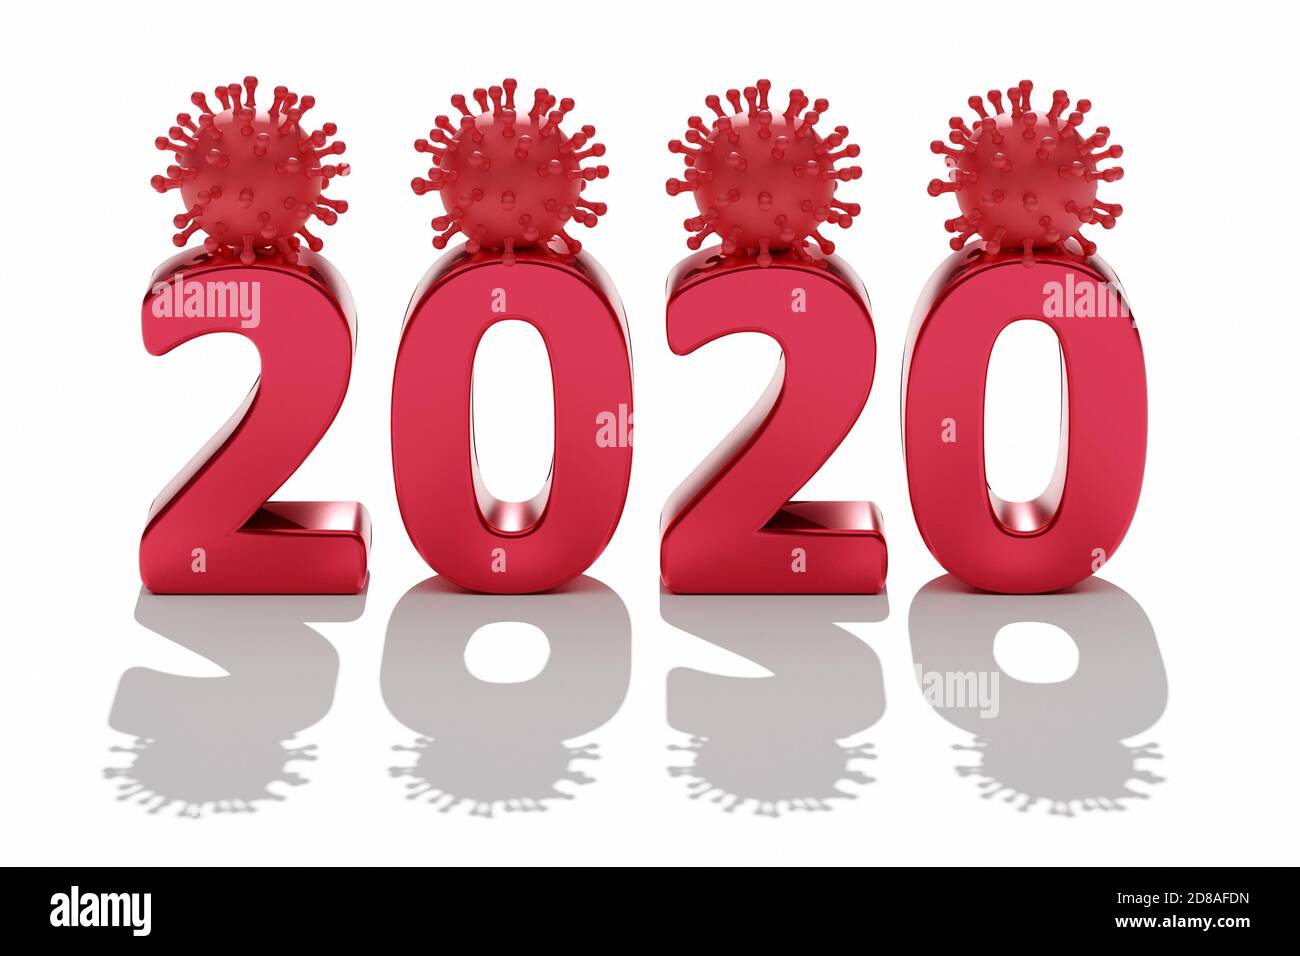 2020 is the year of the coronavirus. Digit 2020 with viruses. 3d rendering Stock Photo